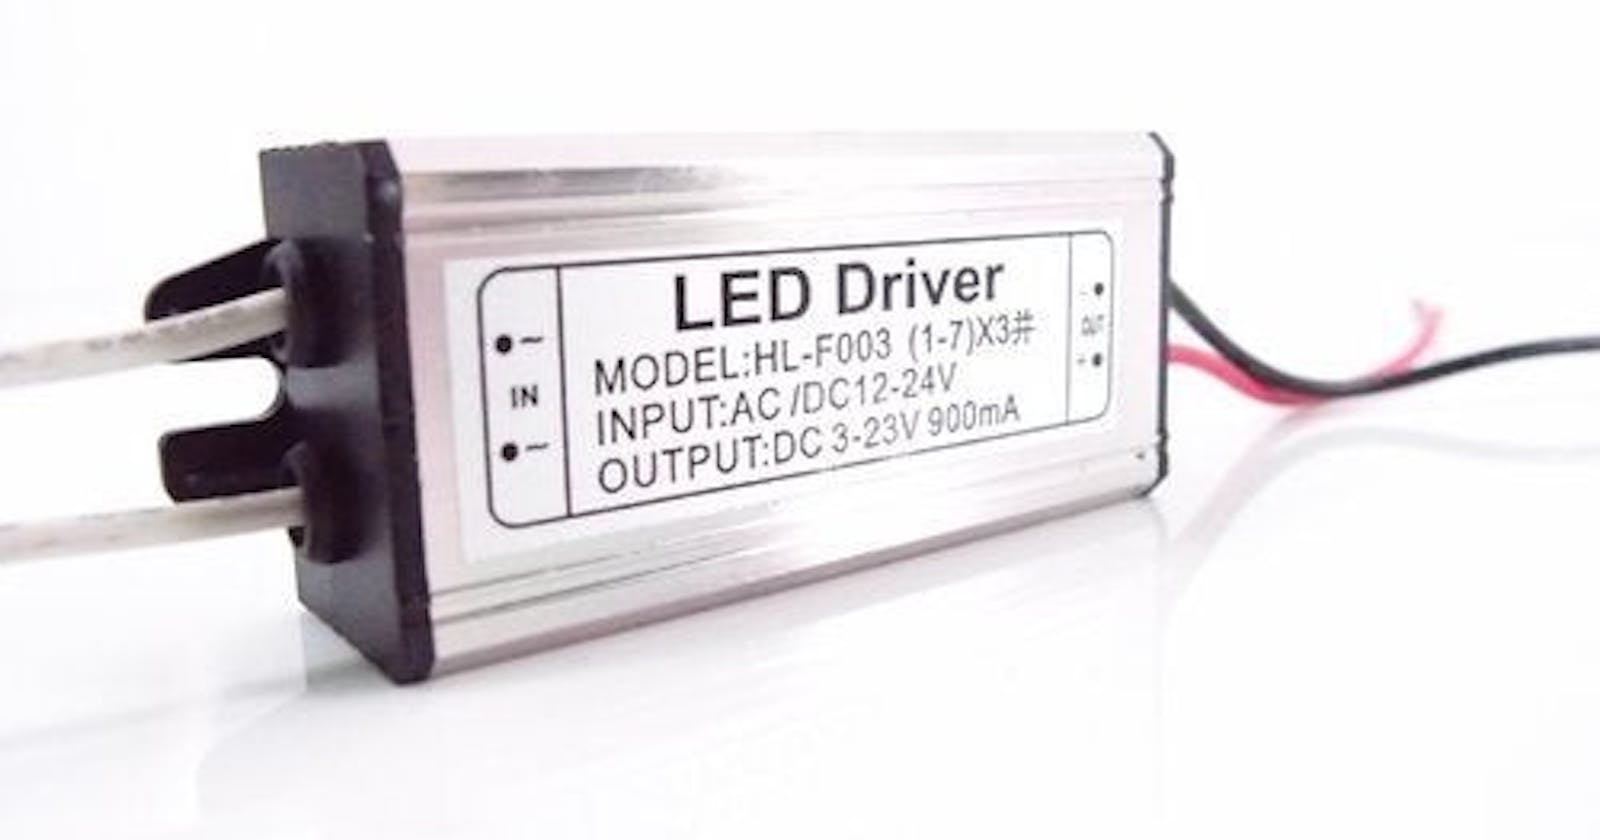 LED Driver Market Industry Share, Size, Analysis, Trends and Future Scope 2027